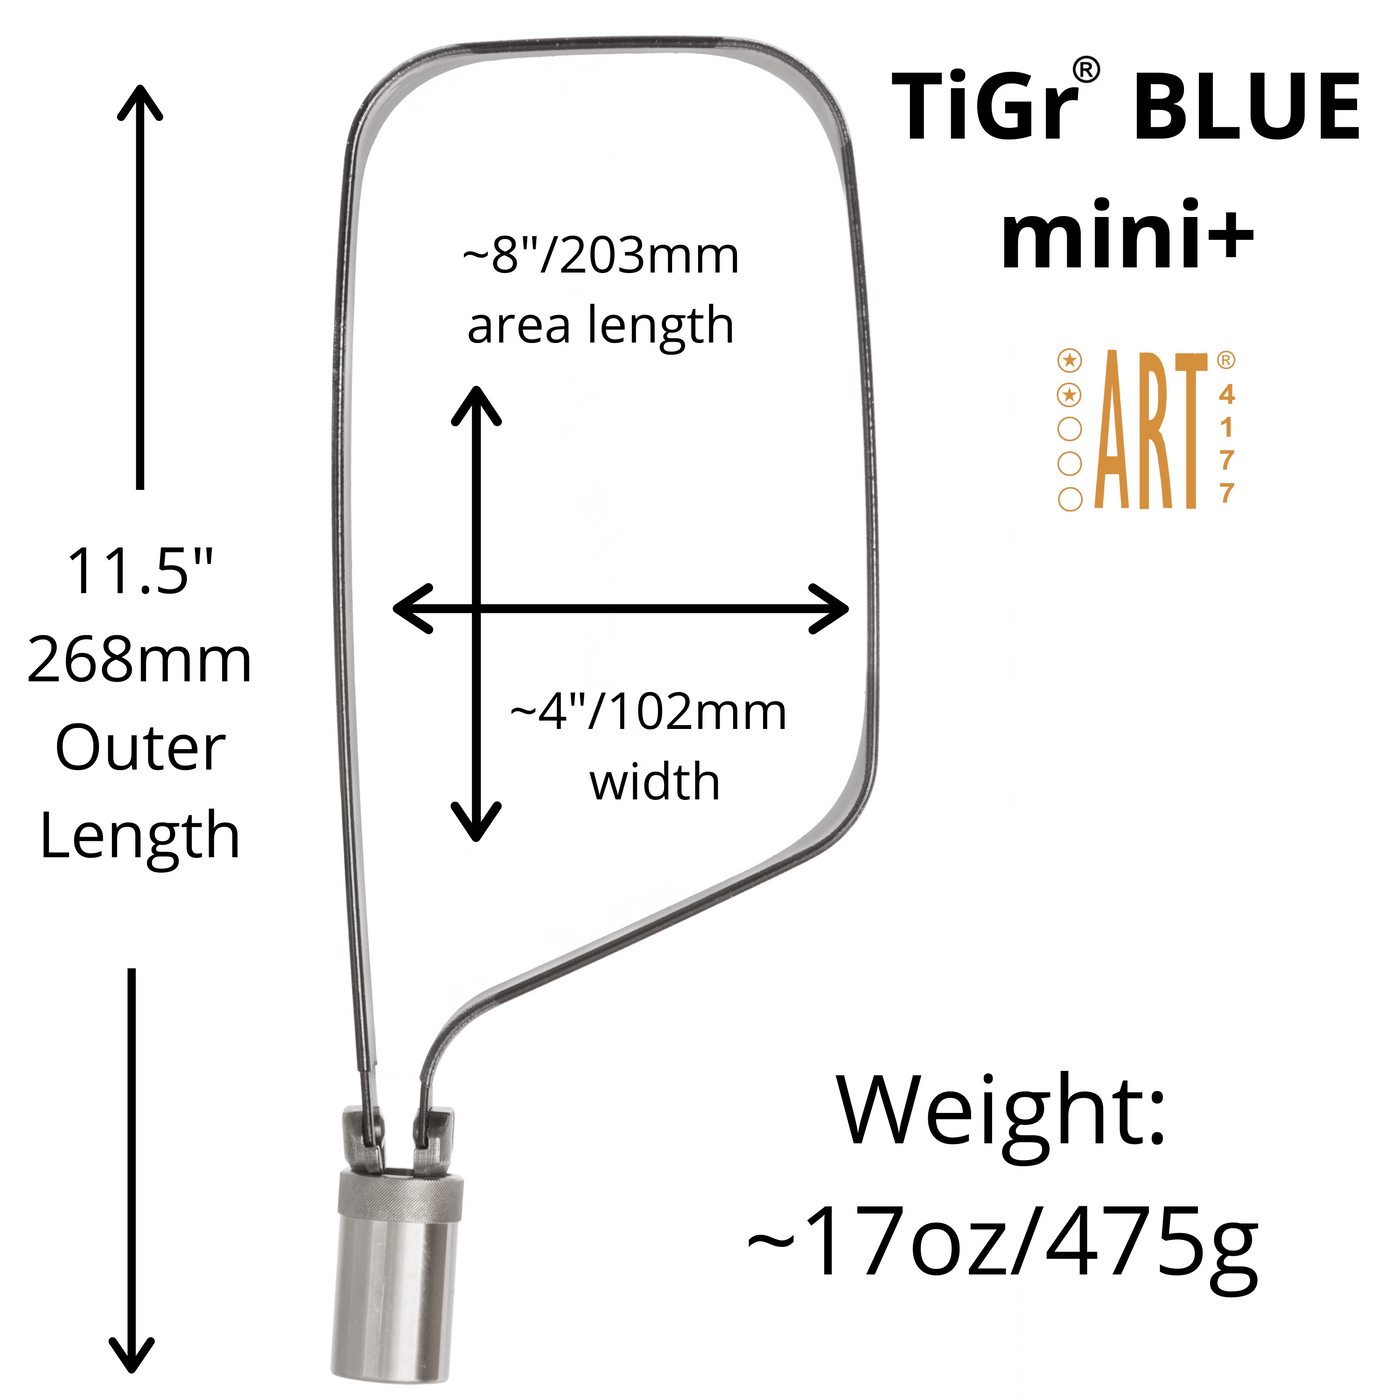 TiGr BLUE mini+  high carbon blue steel u-lock: strong, lightweight, certified bicycle security by TiGr Lock